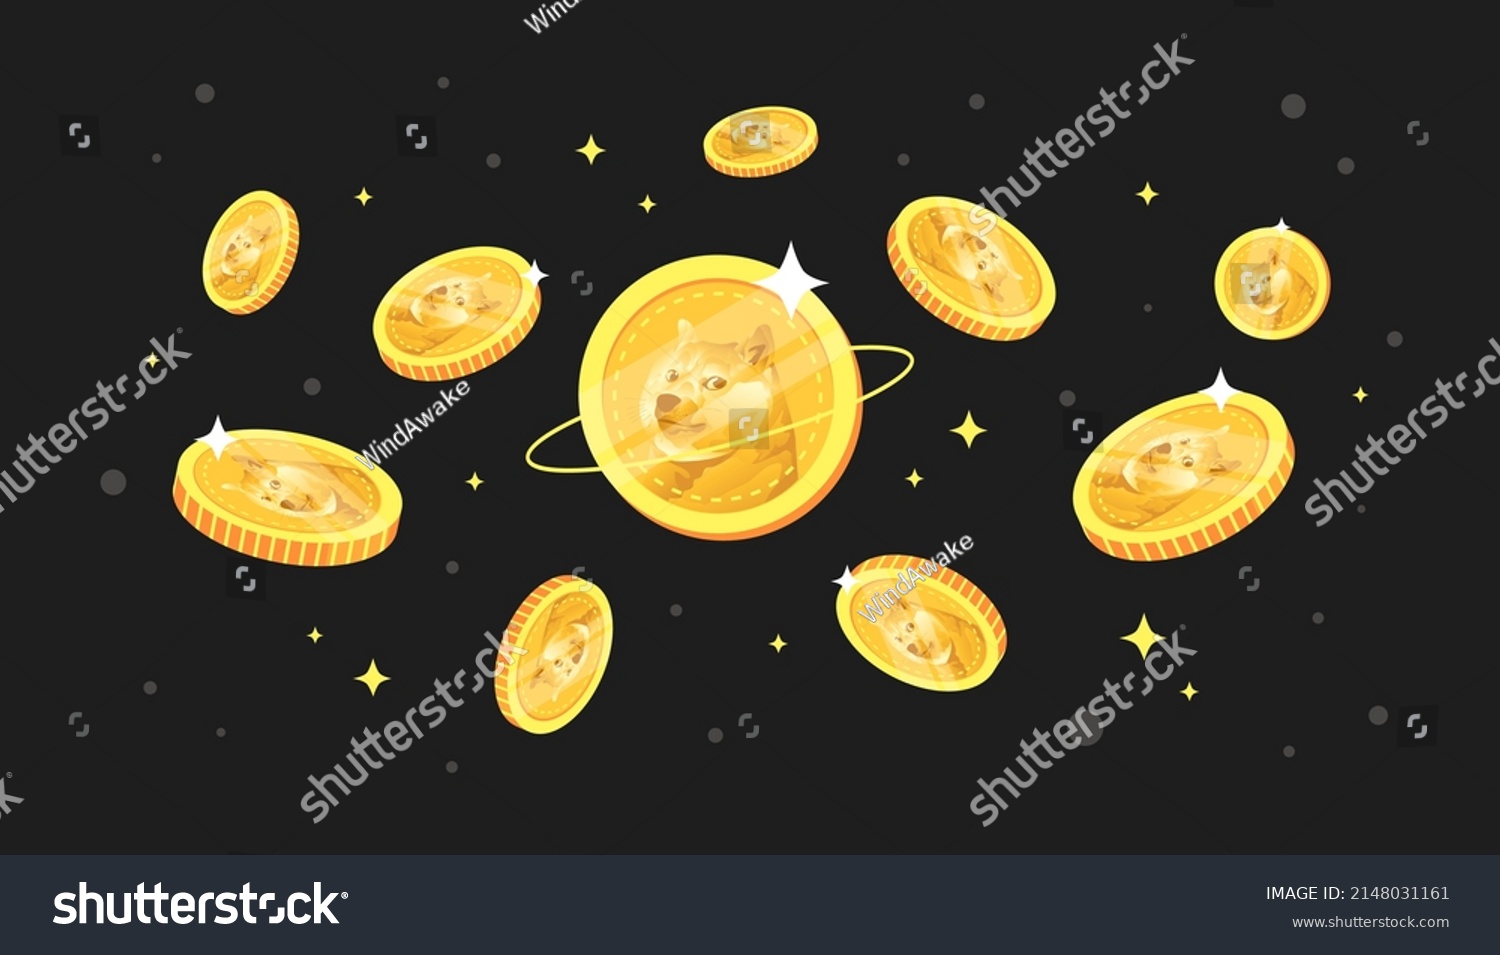 SVG of Dogecoin (DOGE) coins falling from the sky. DOGE cryptocurrency concept banner background. svg